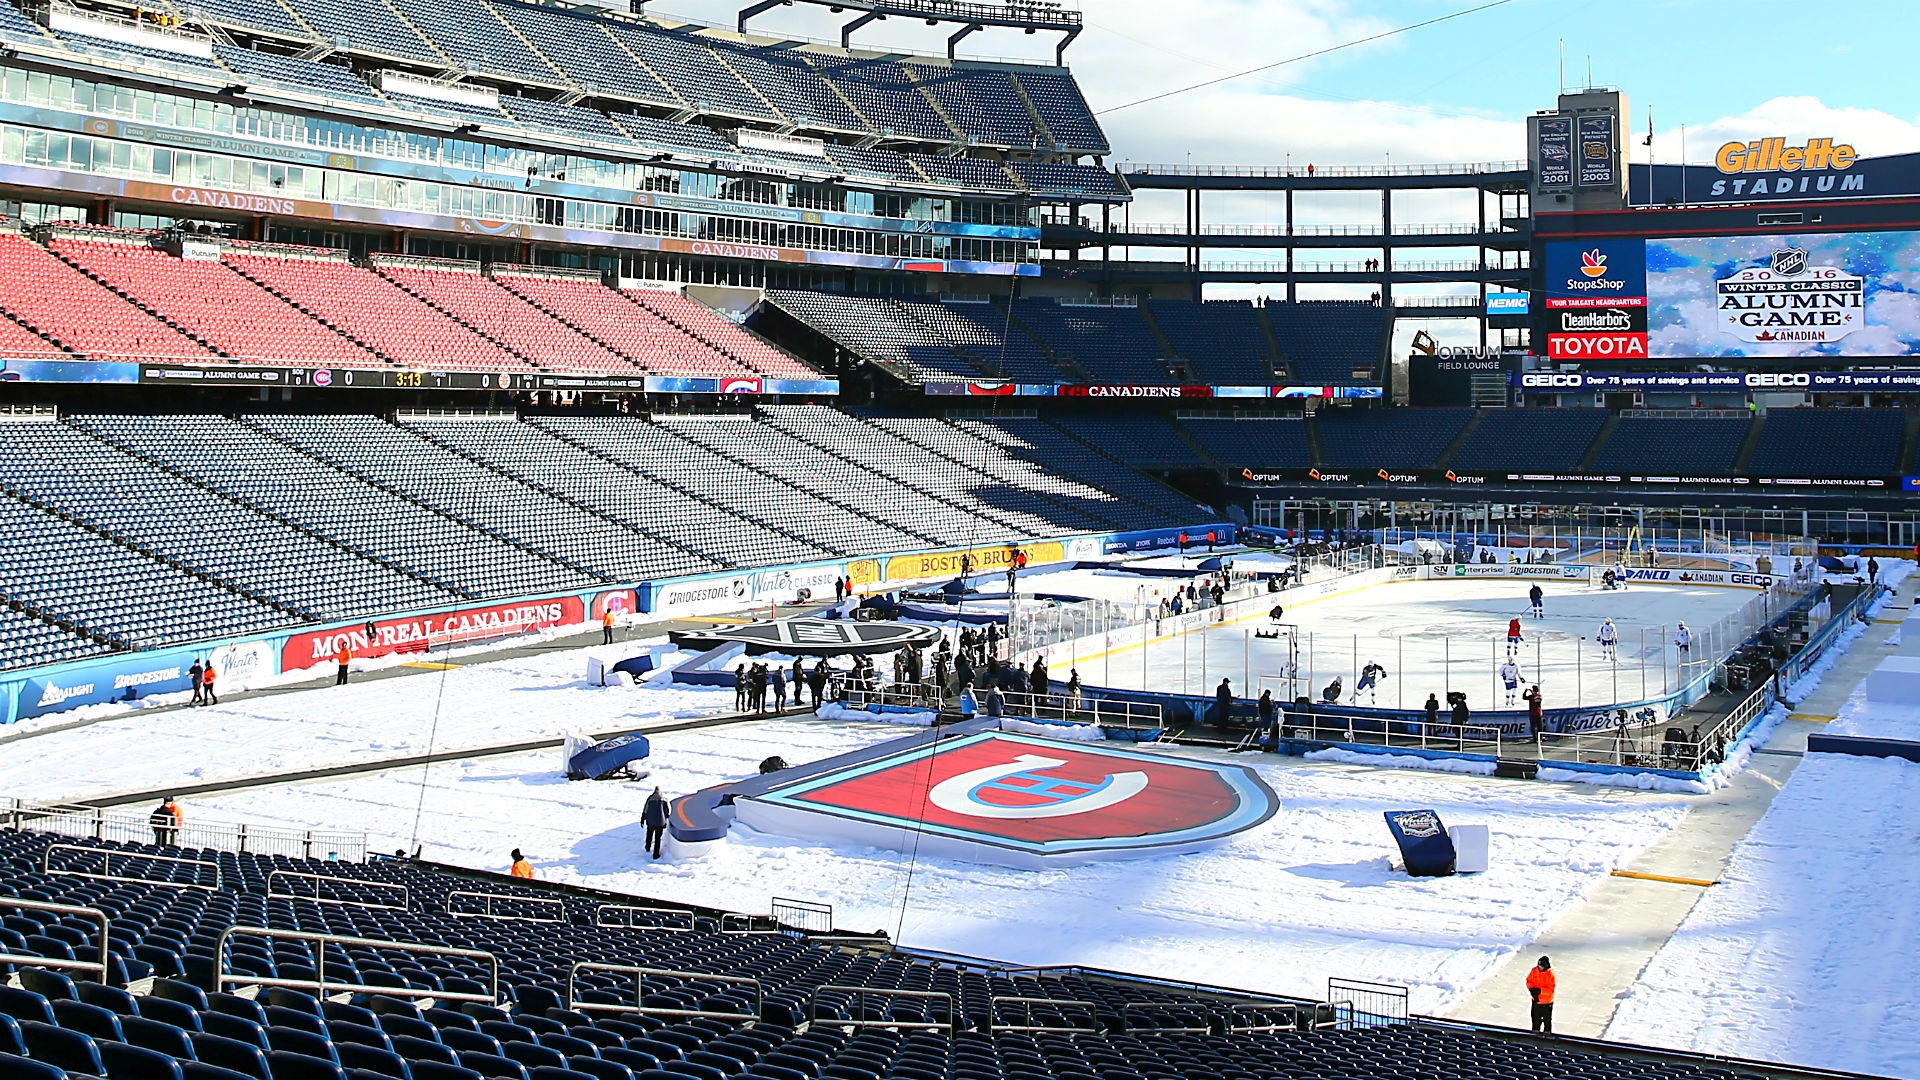 Canadiens-Bruins rivalry makes Winter Classic more than an oddity